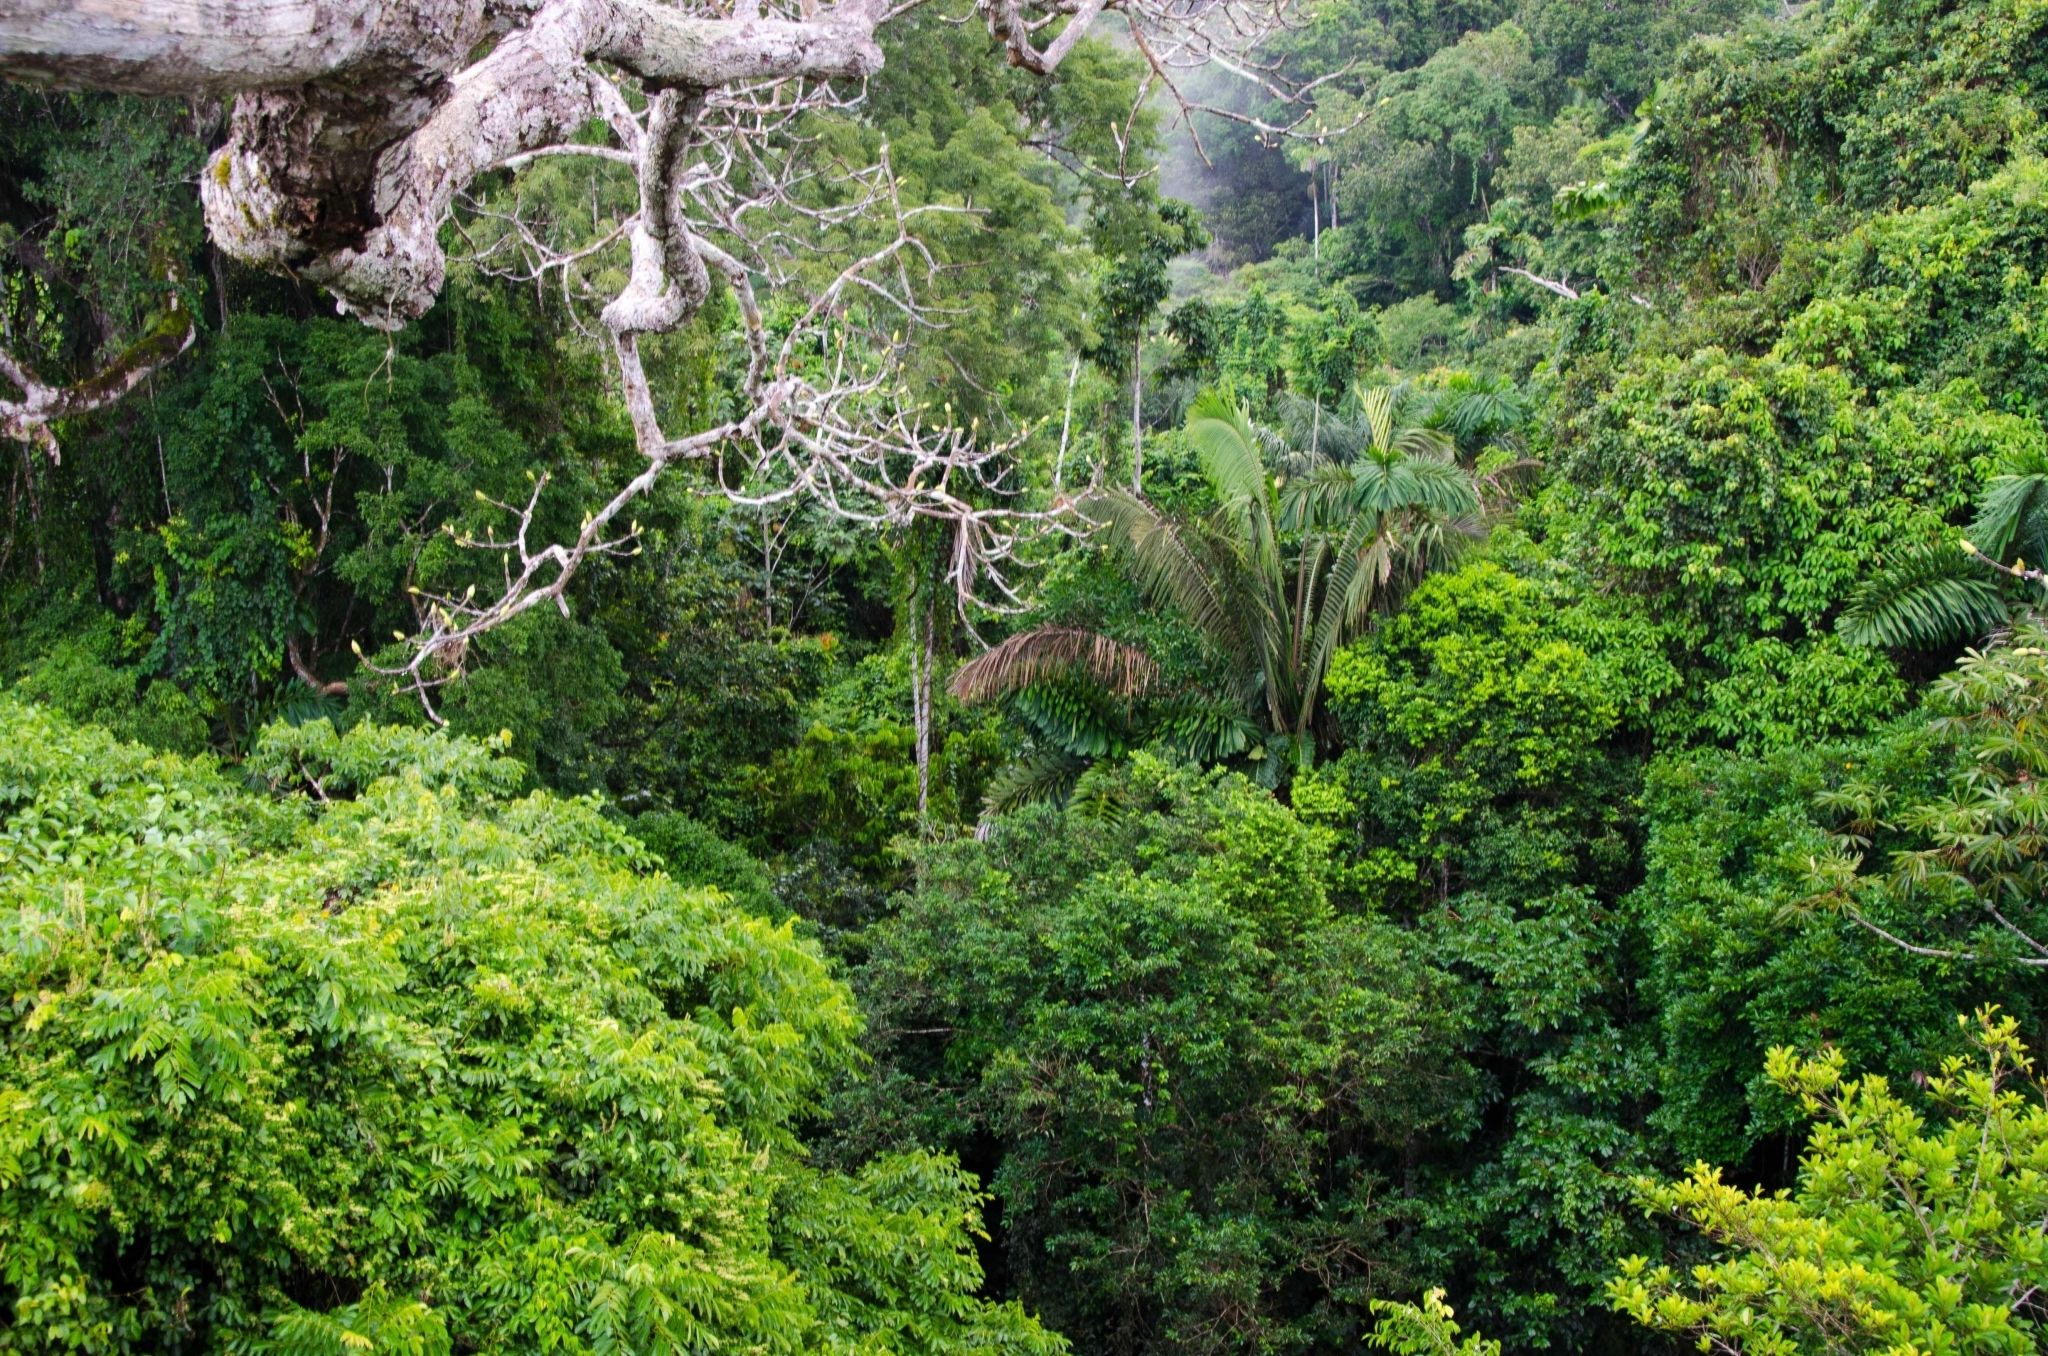 Overlooking the vast Amazon rainforest from a high canopy